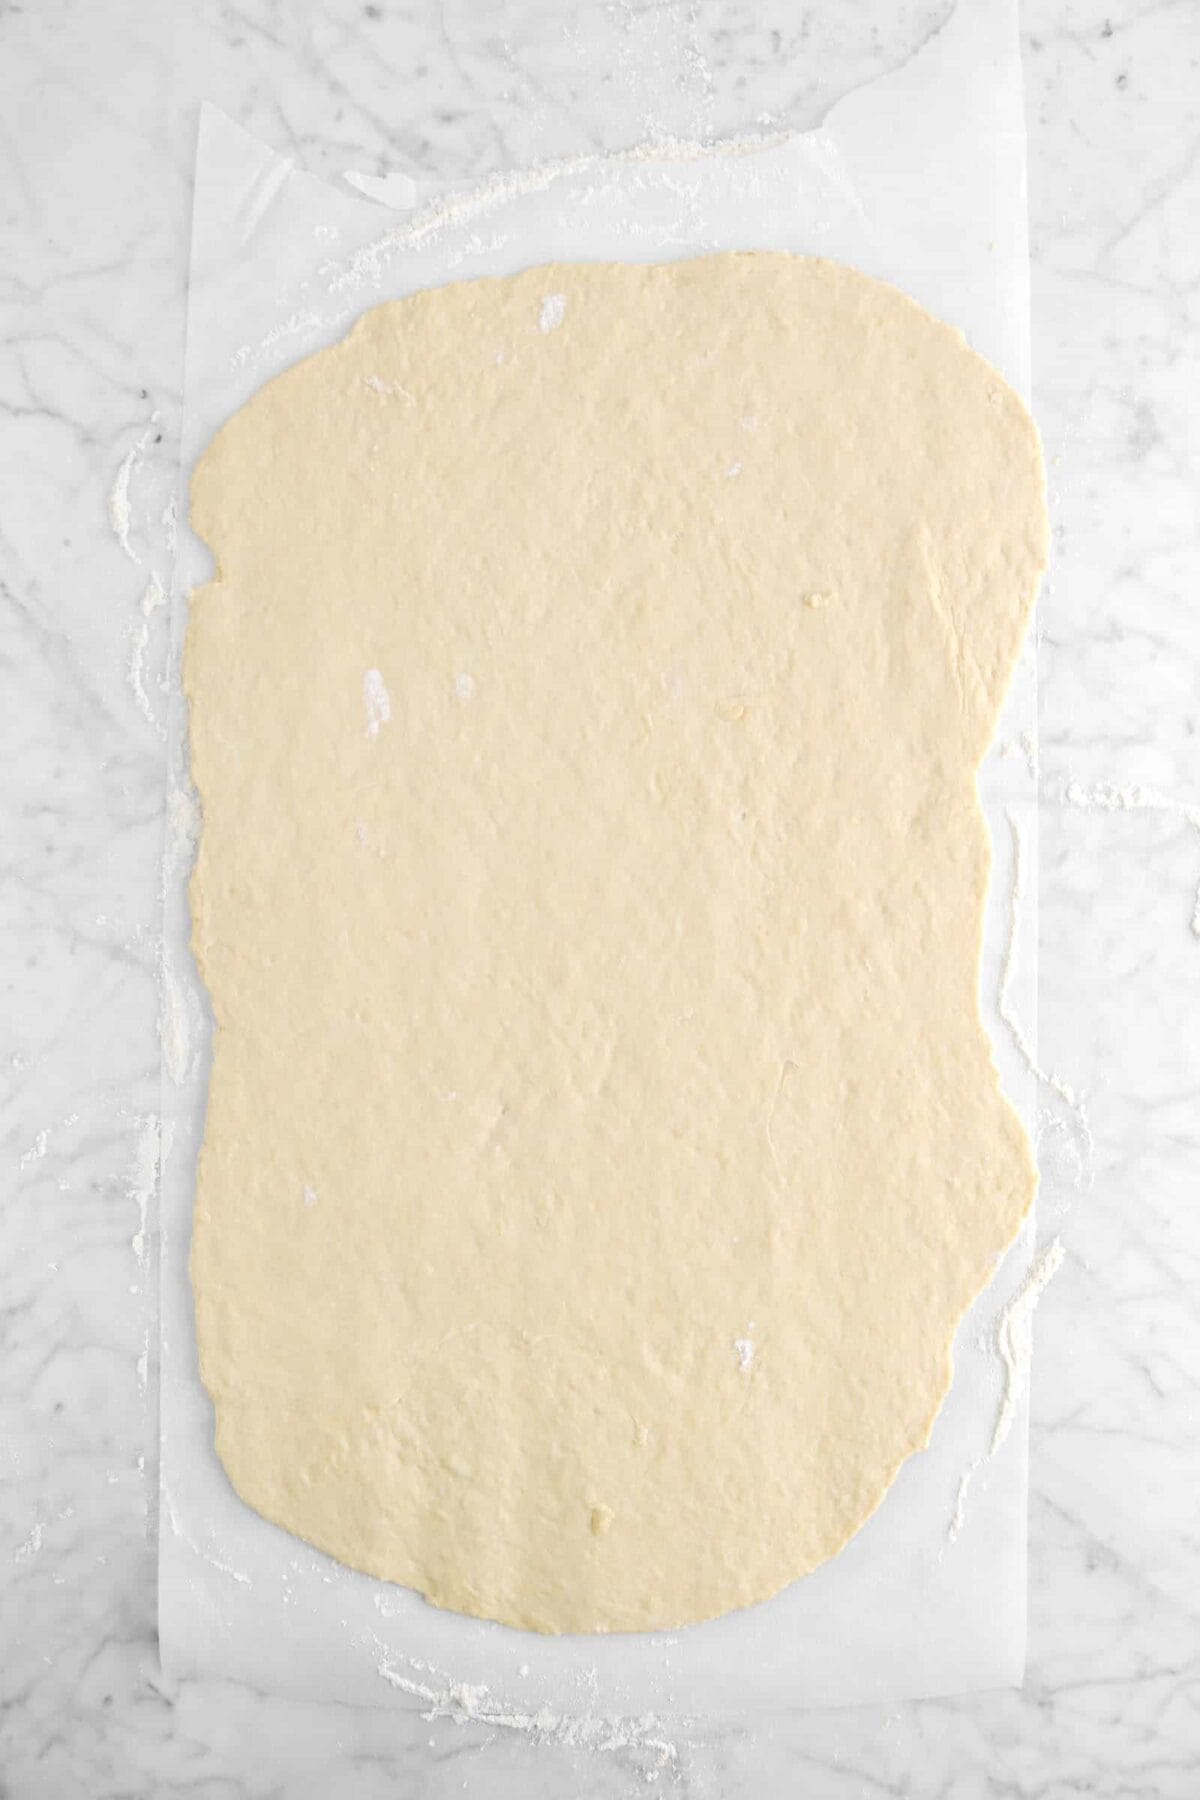 dough rolled out into a long rectangle on parchment paper